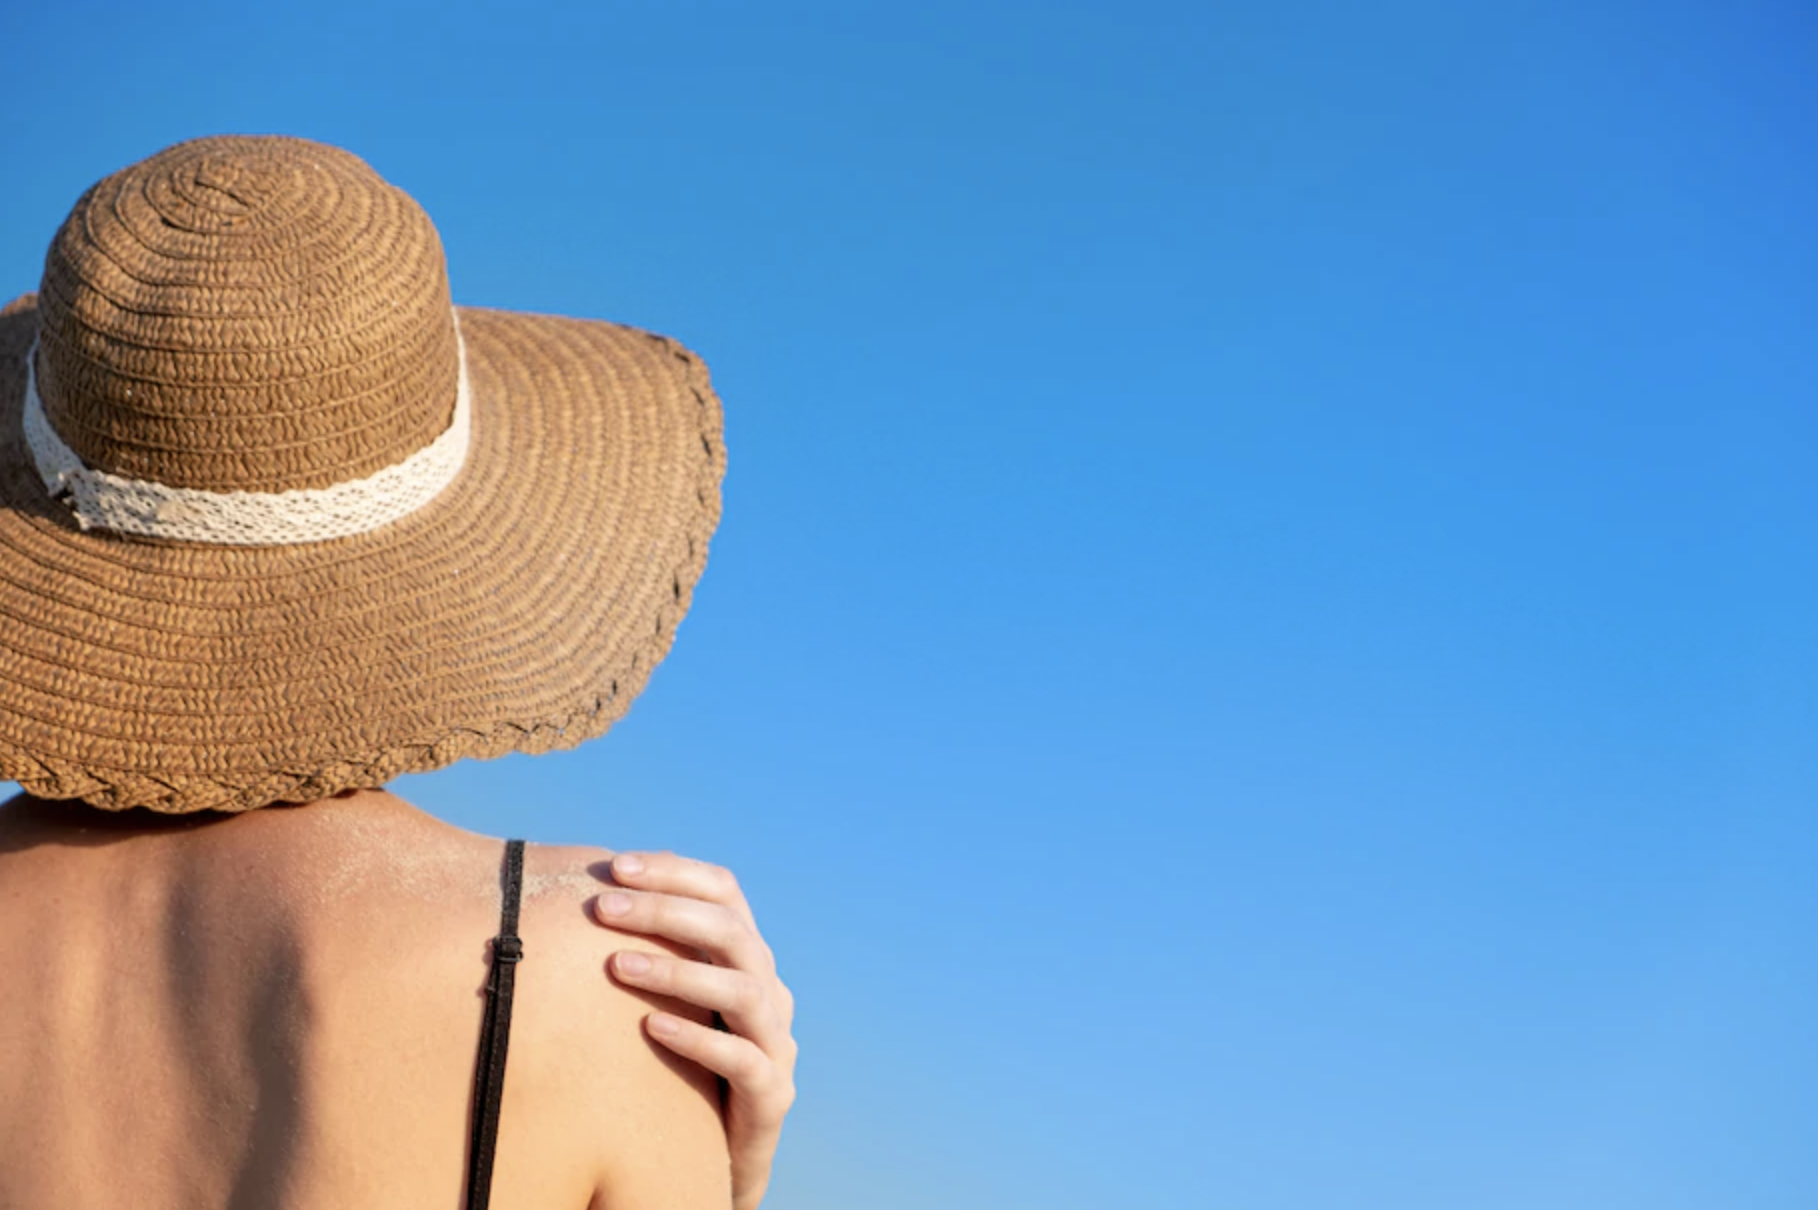 Many types of skin cancer are preventable. Here are good methods to protect yourself.